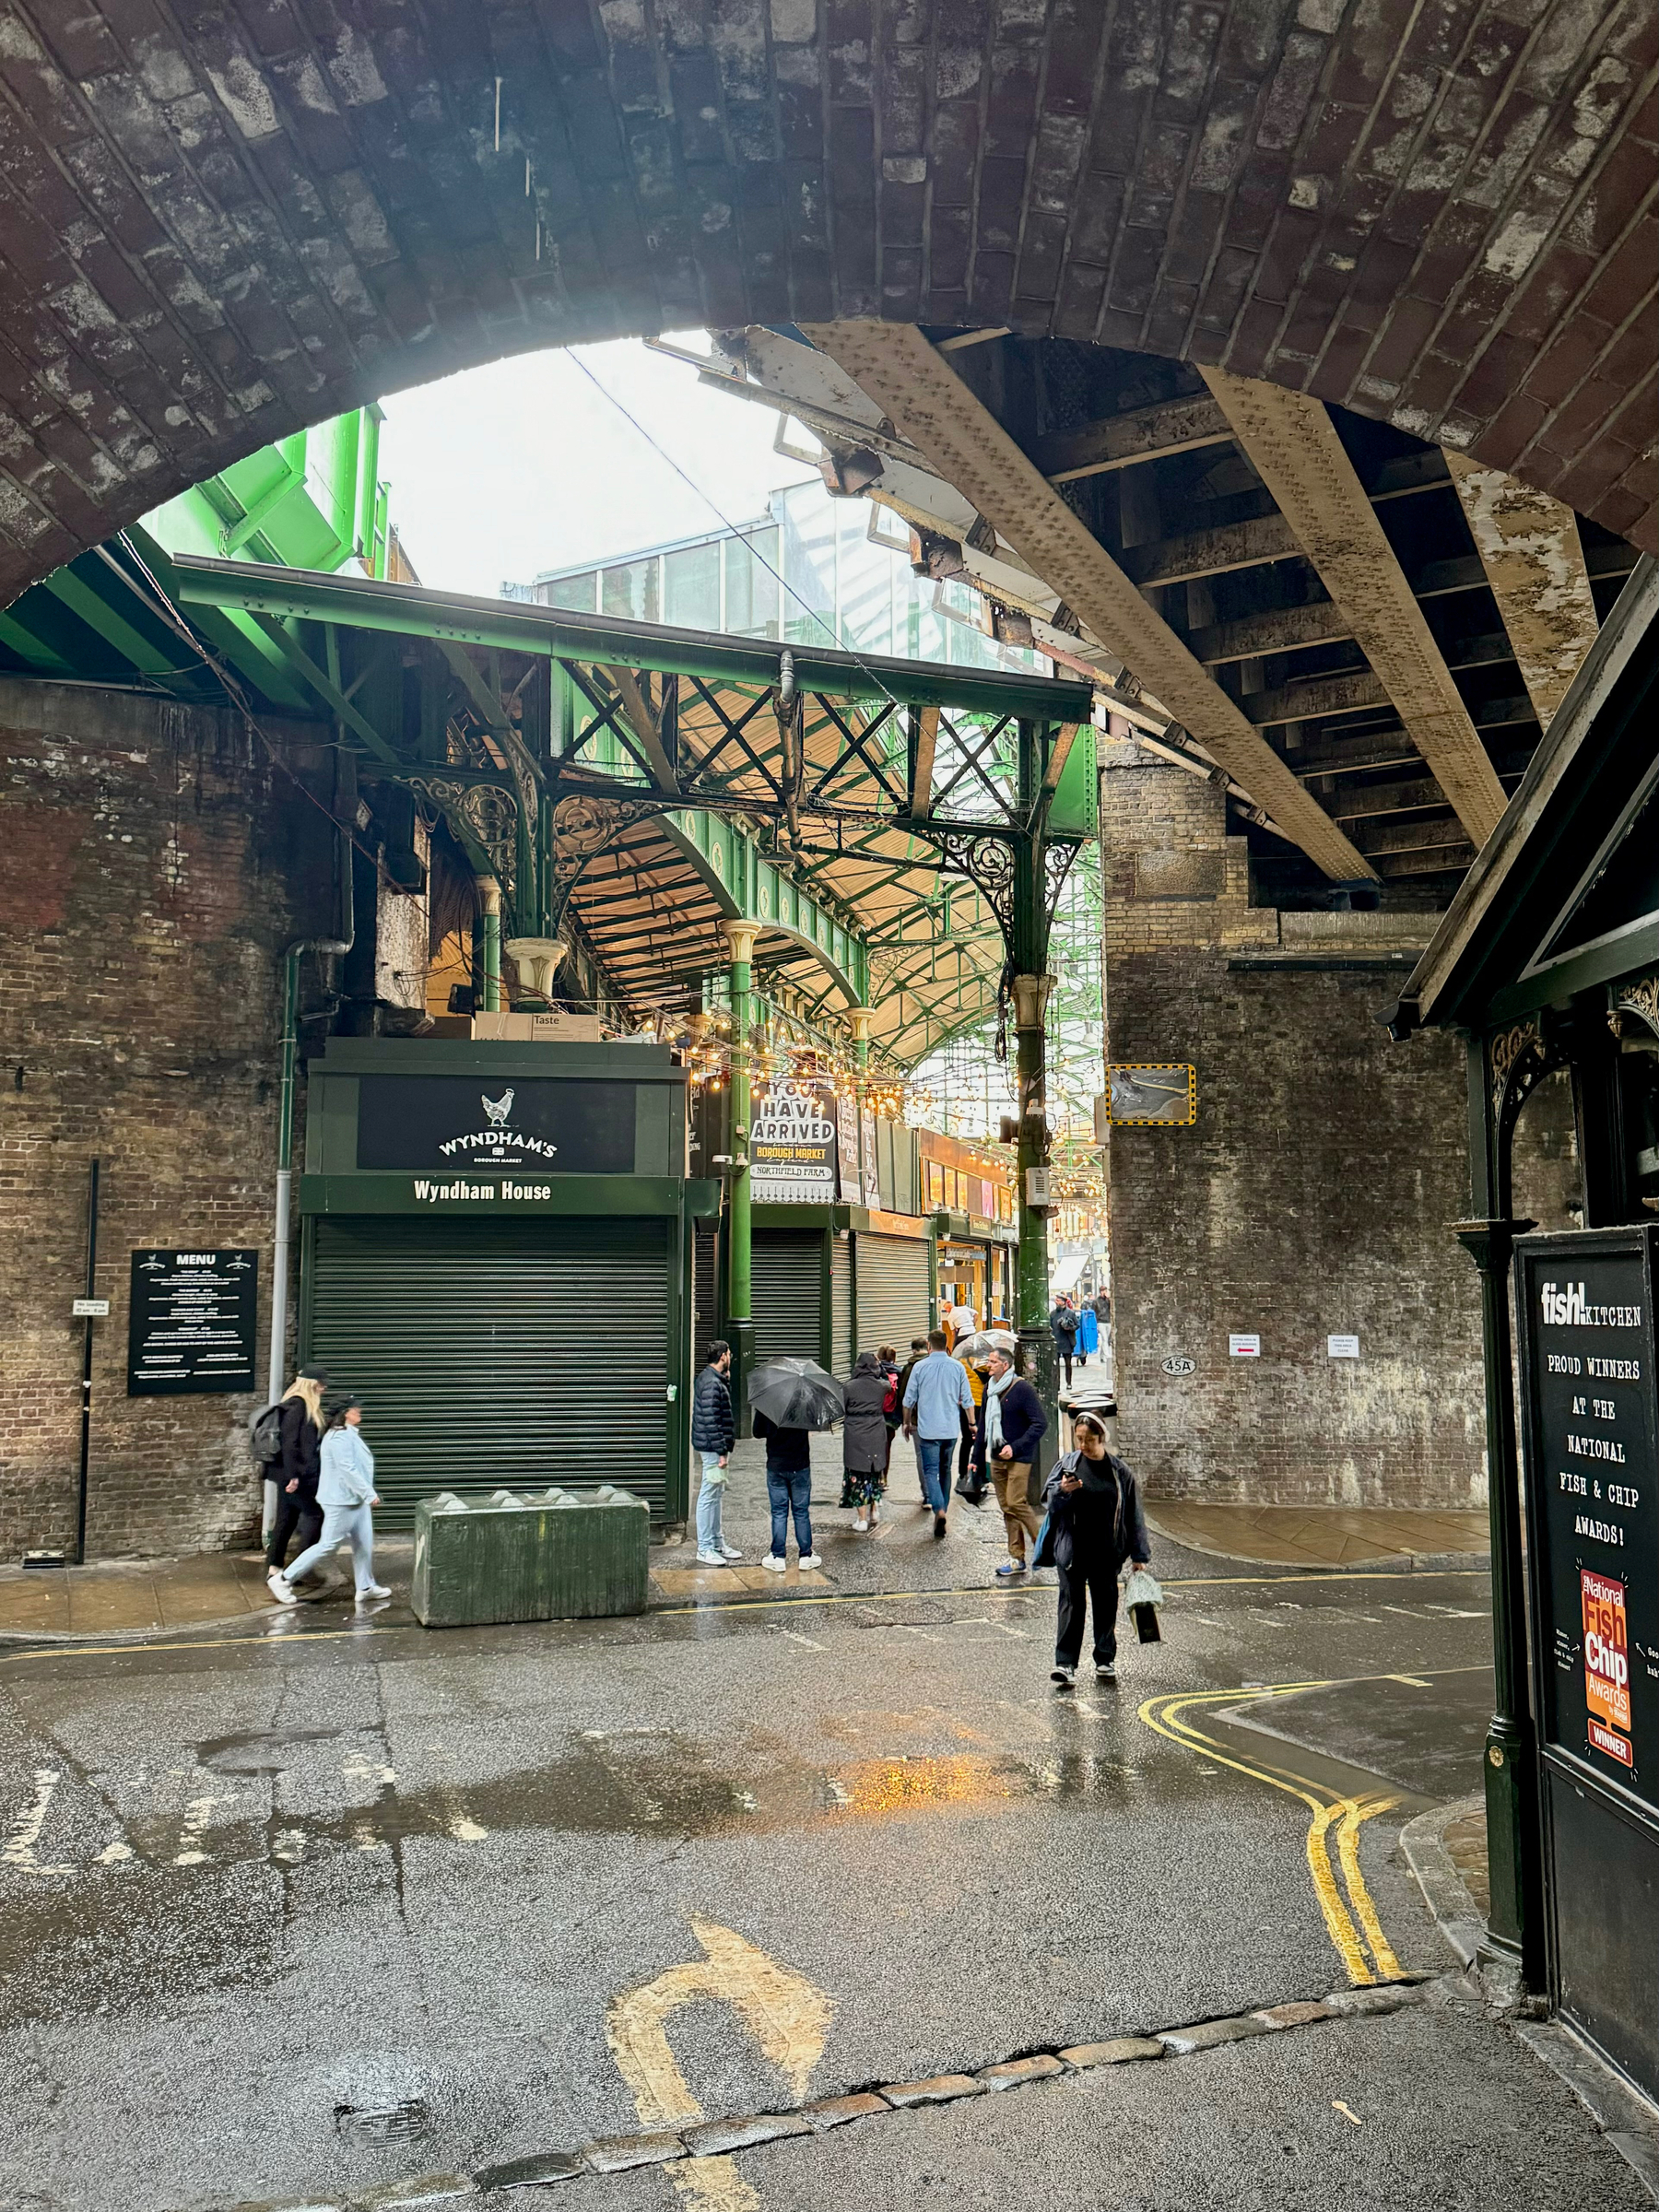 An urban street scene under a railway bridge with pedestrians walking and closed shopfronts, showcasing the architecture and atmosphere of a city on a damp, overcast day.